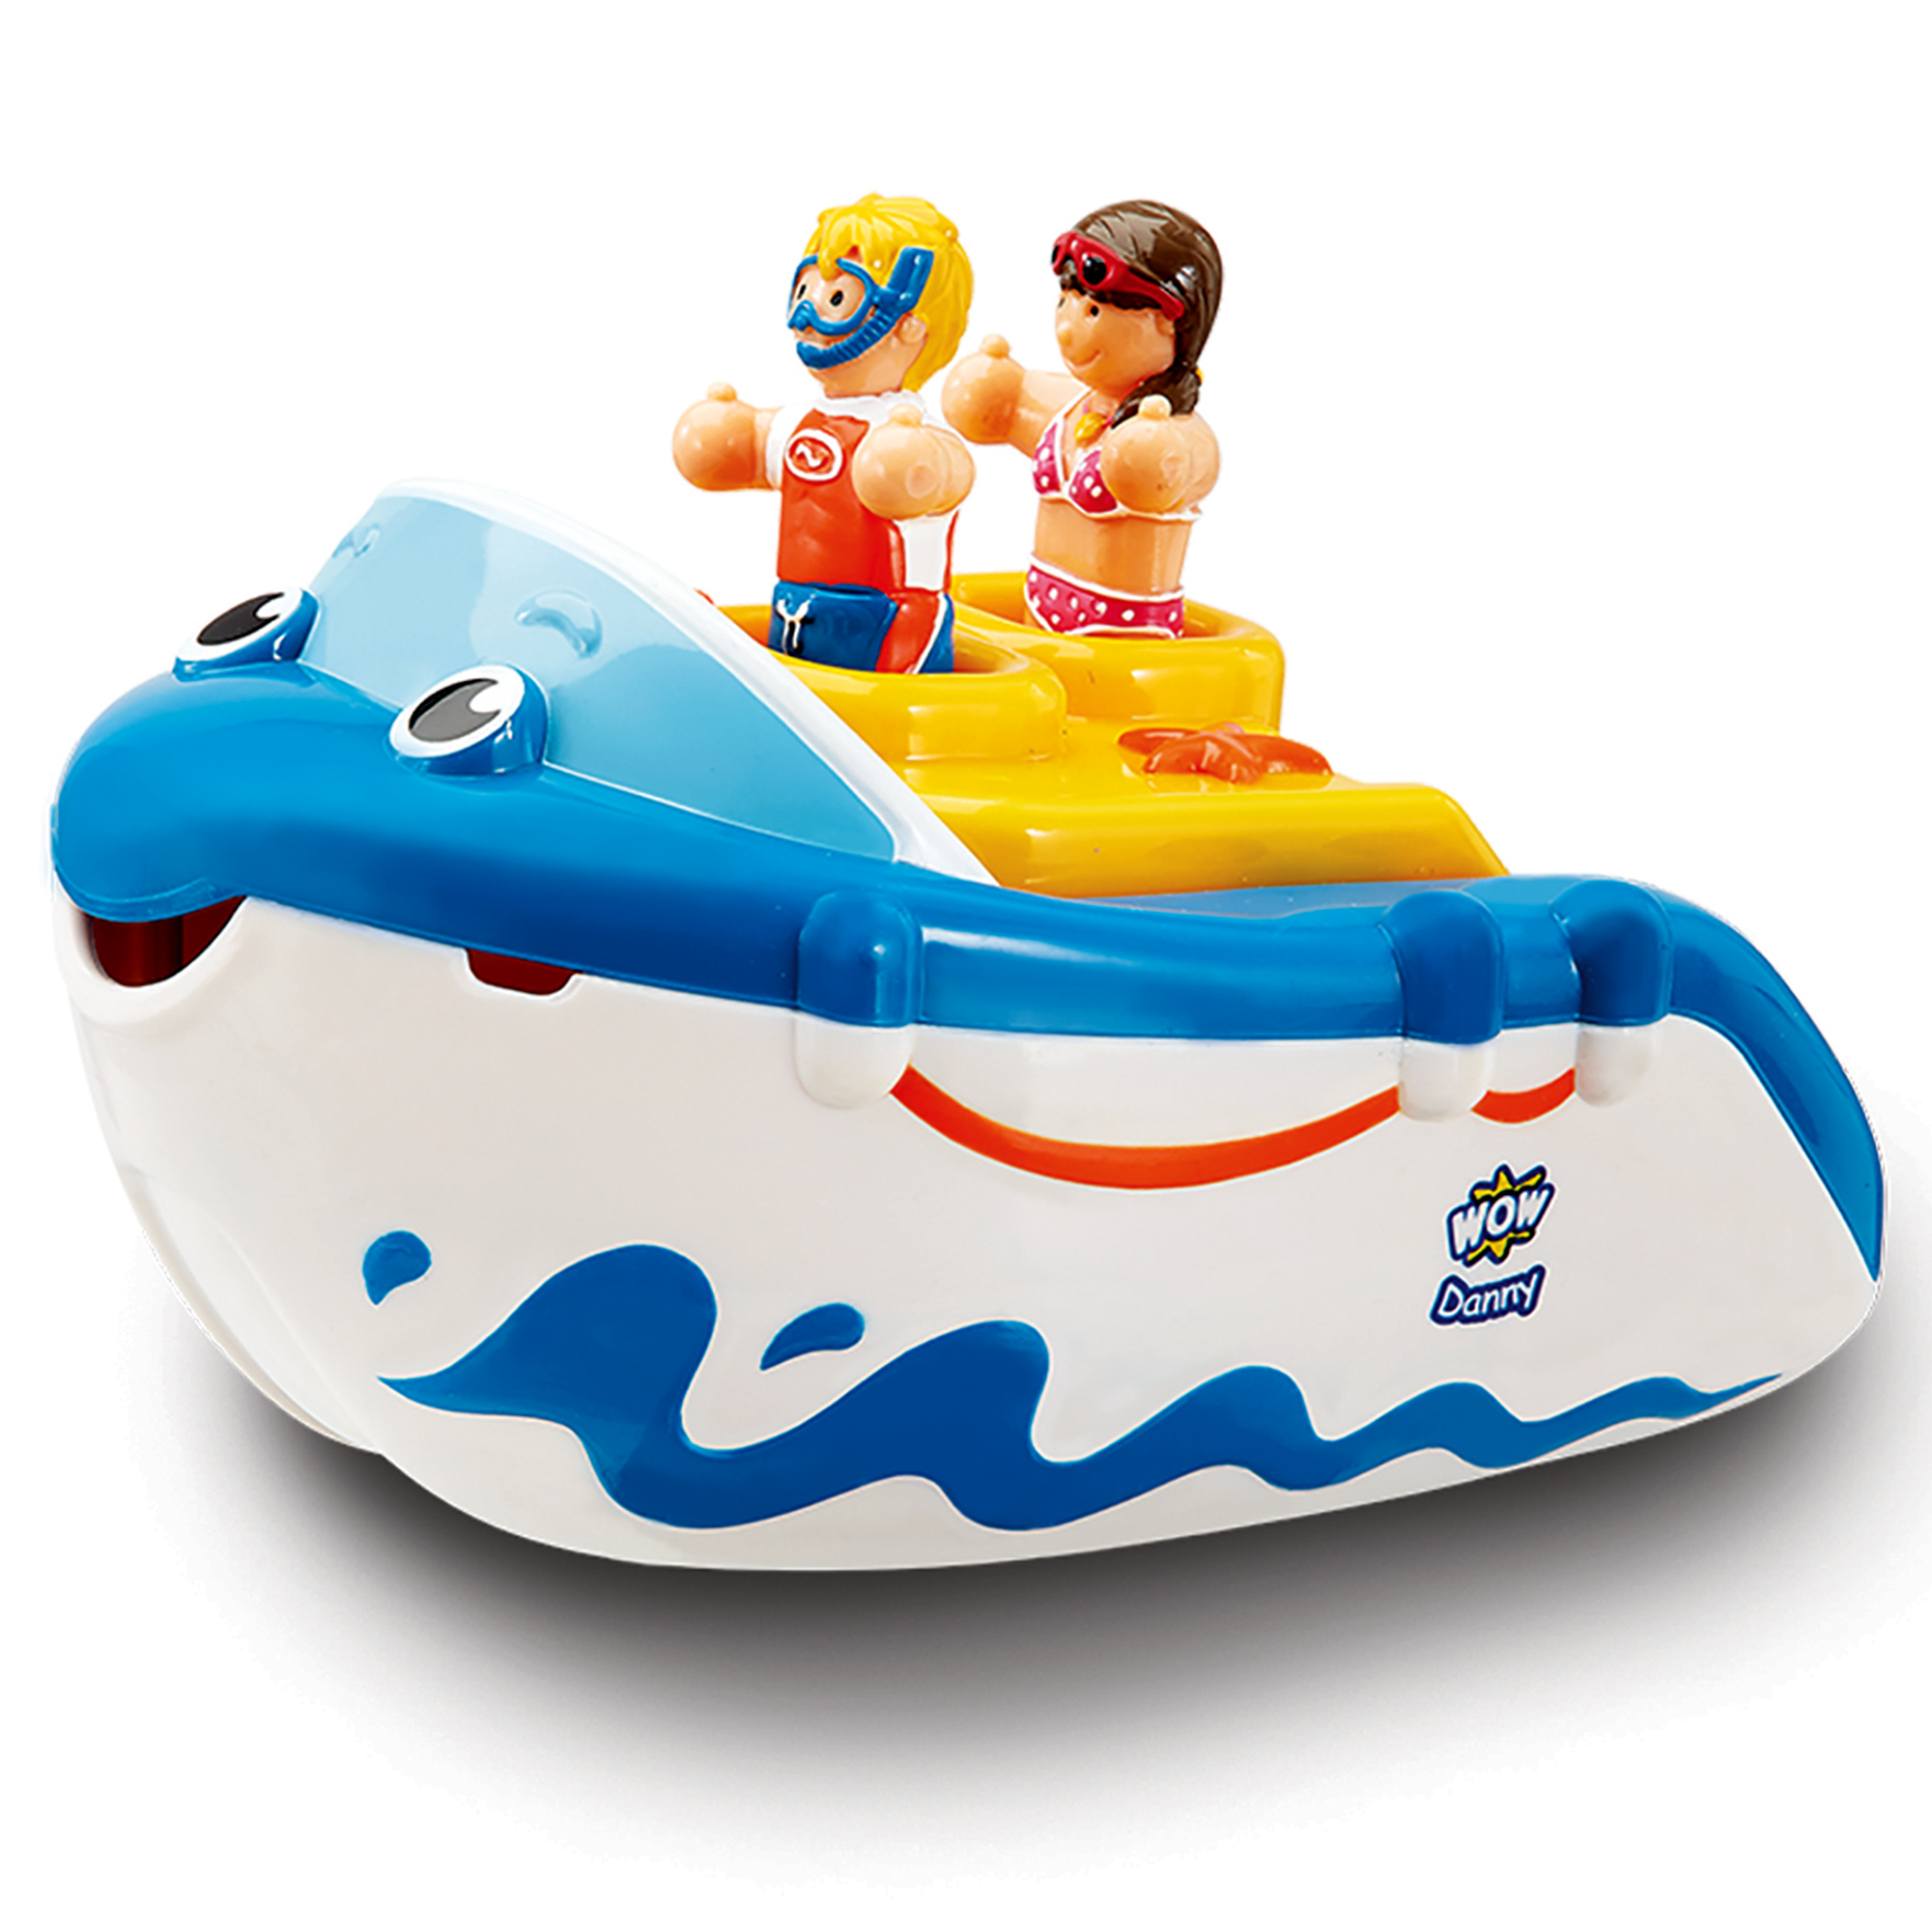 Wow Toys Danny	's Diving Adventure (Bath Toy)